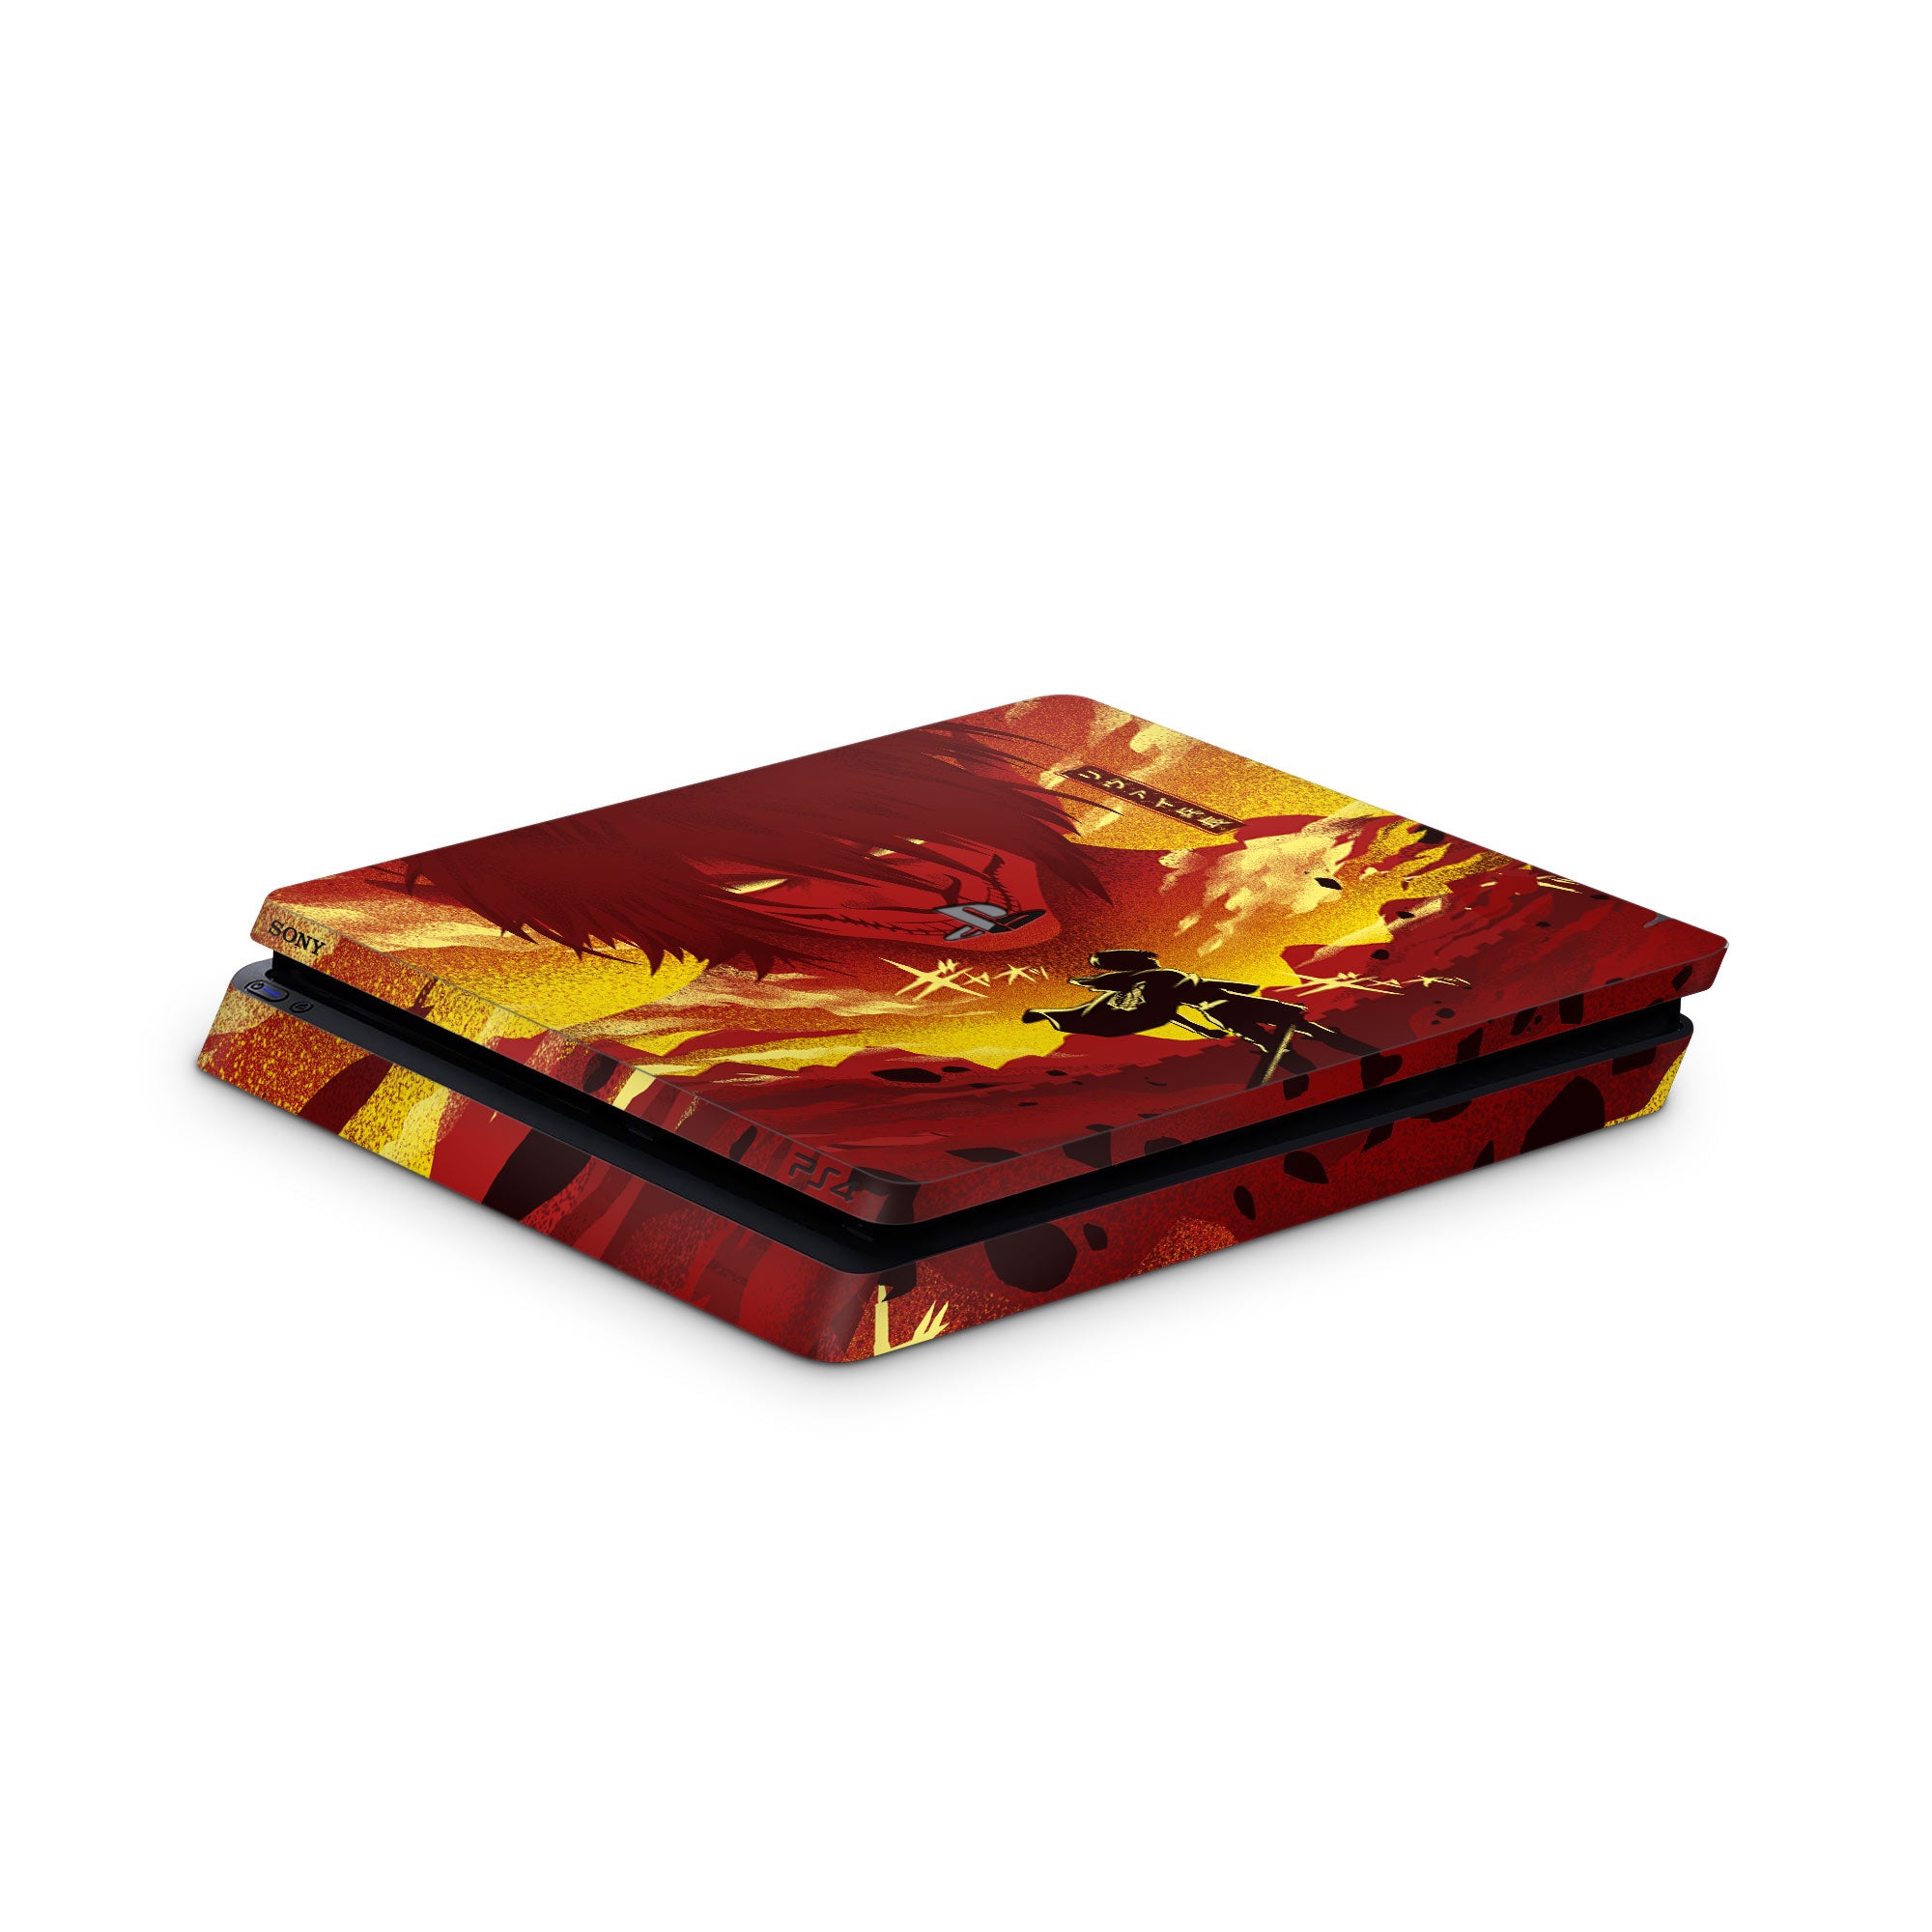 Humanity's Strongest - PS4 Slim Console Skin